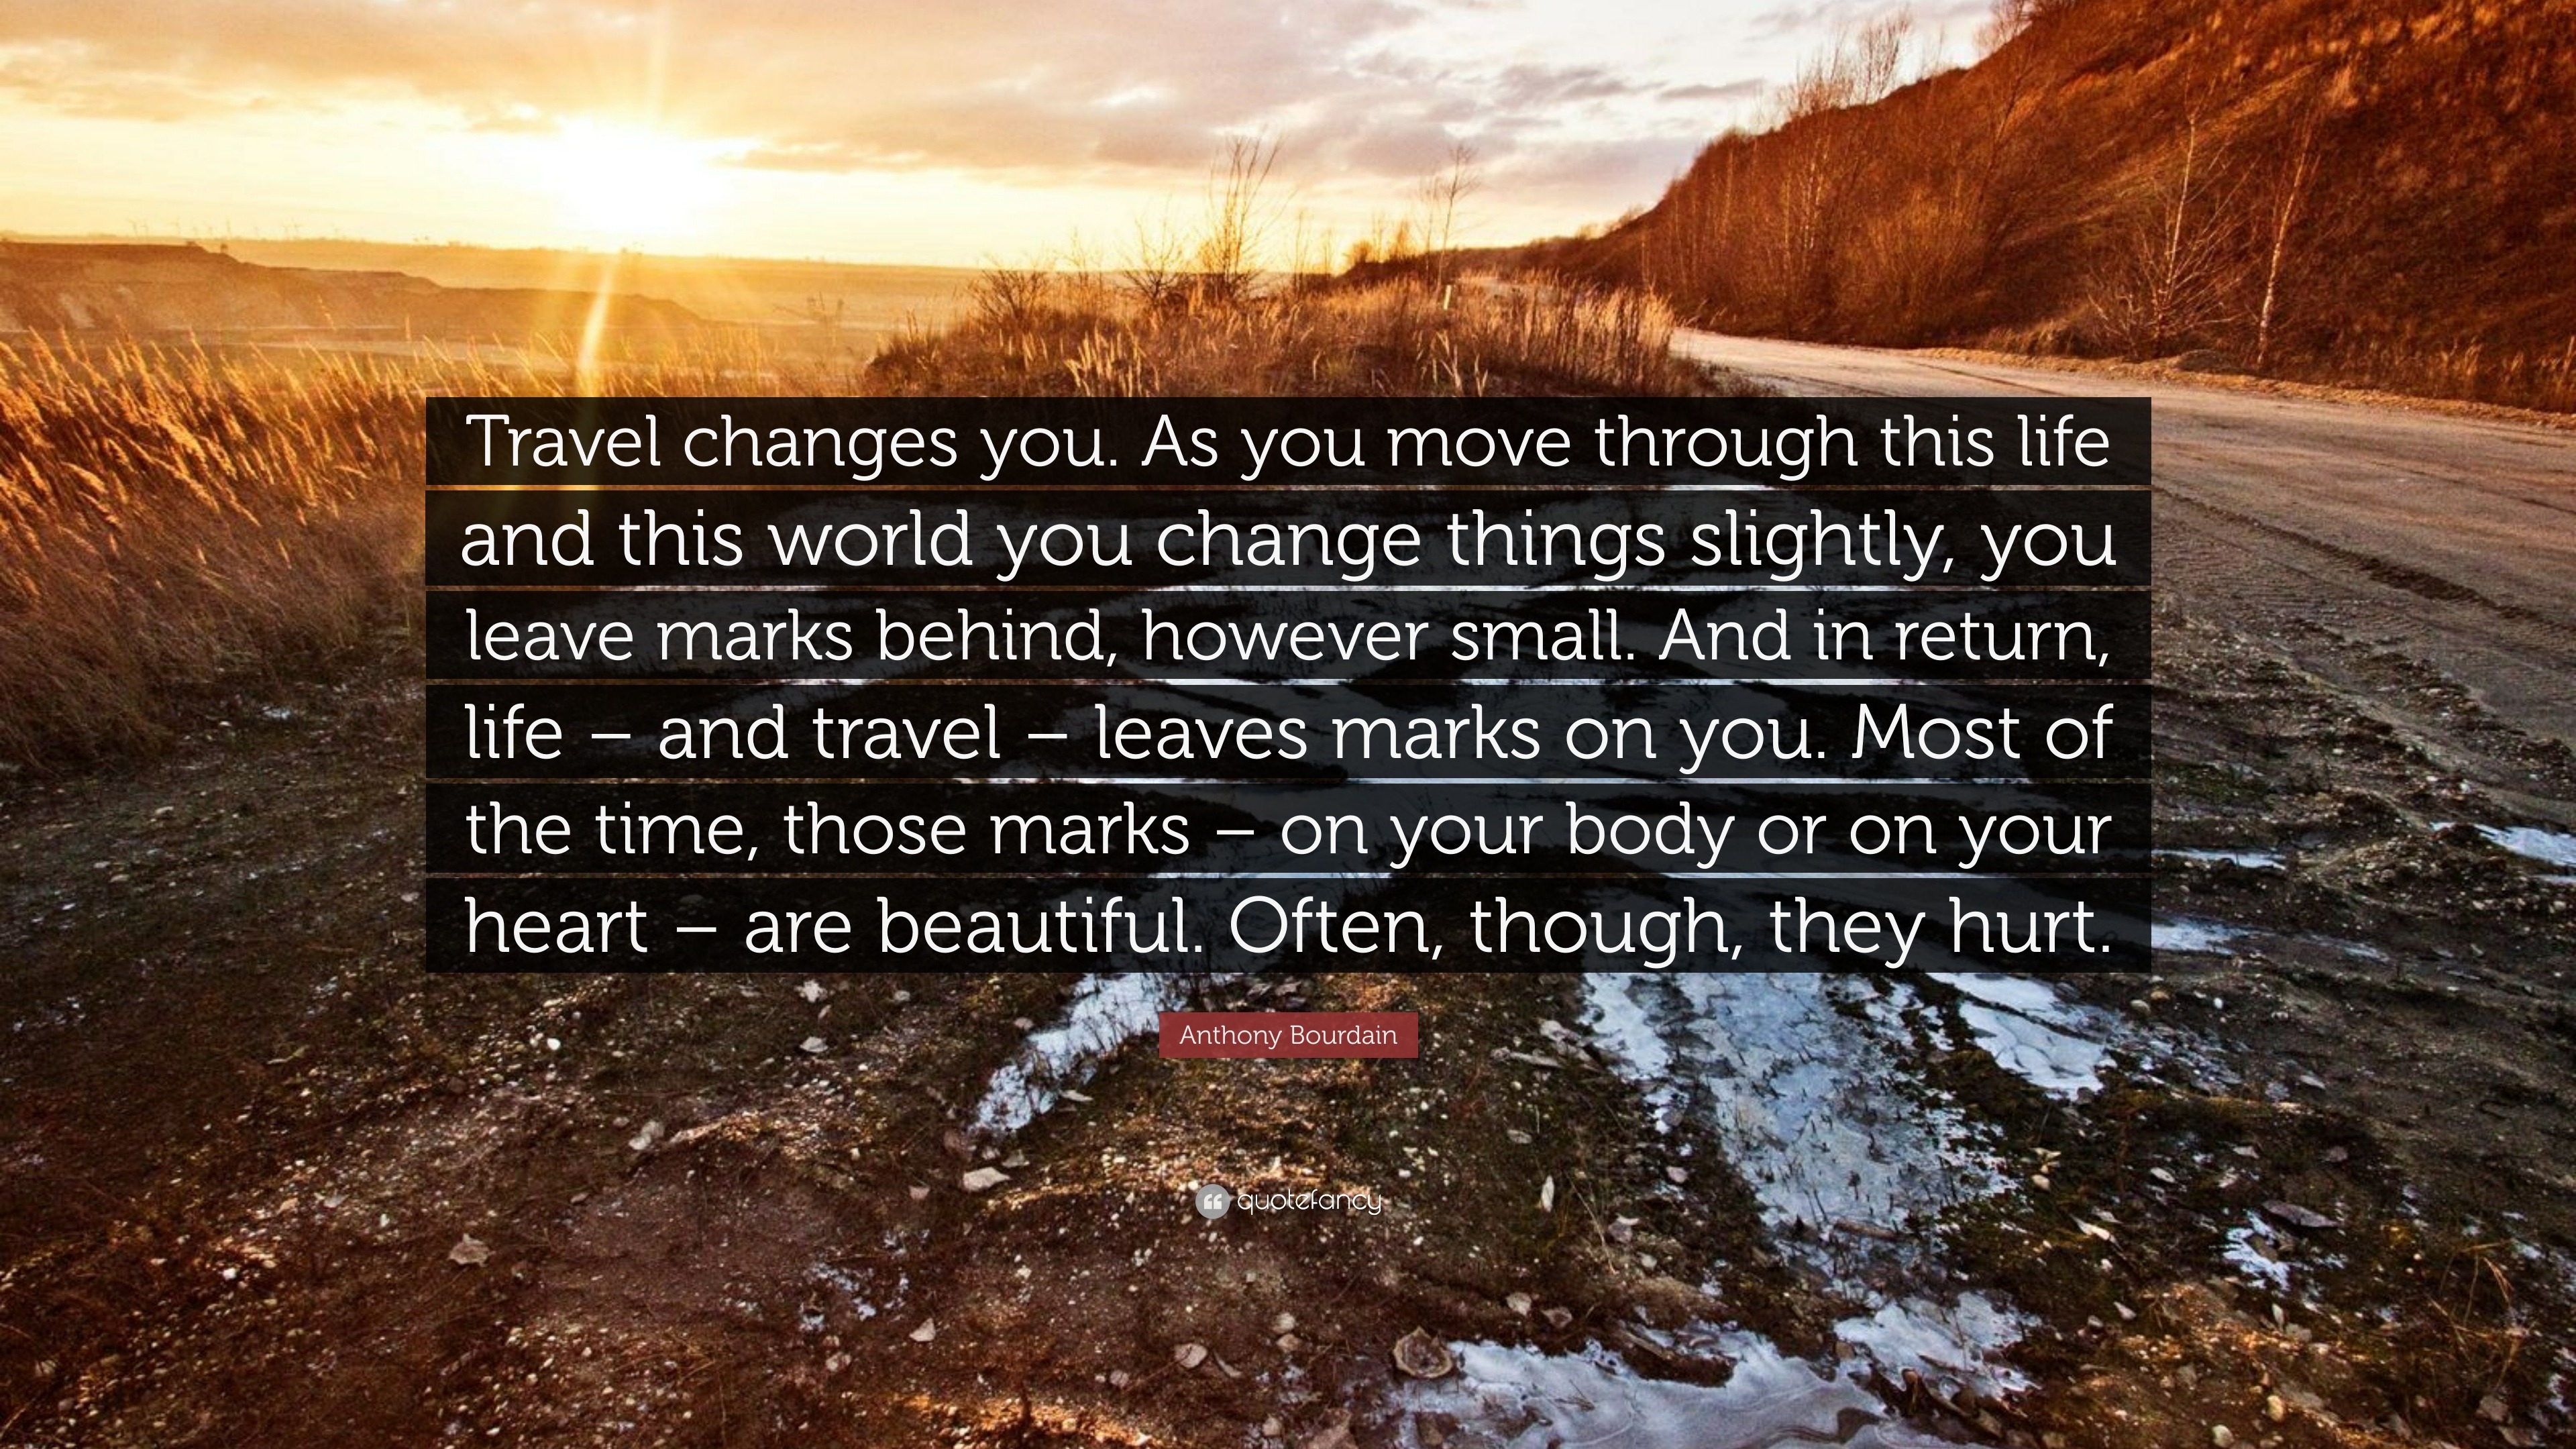 travel quotes by anthony bourdain